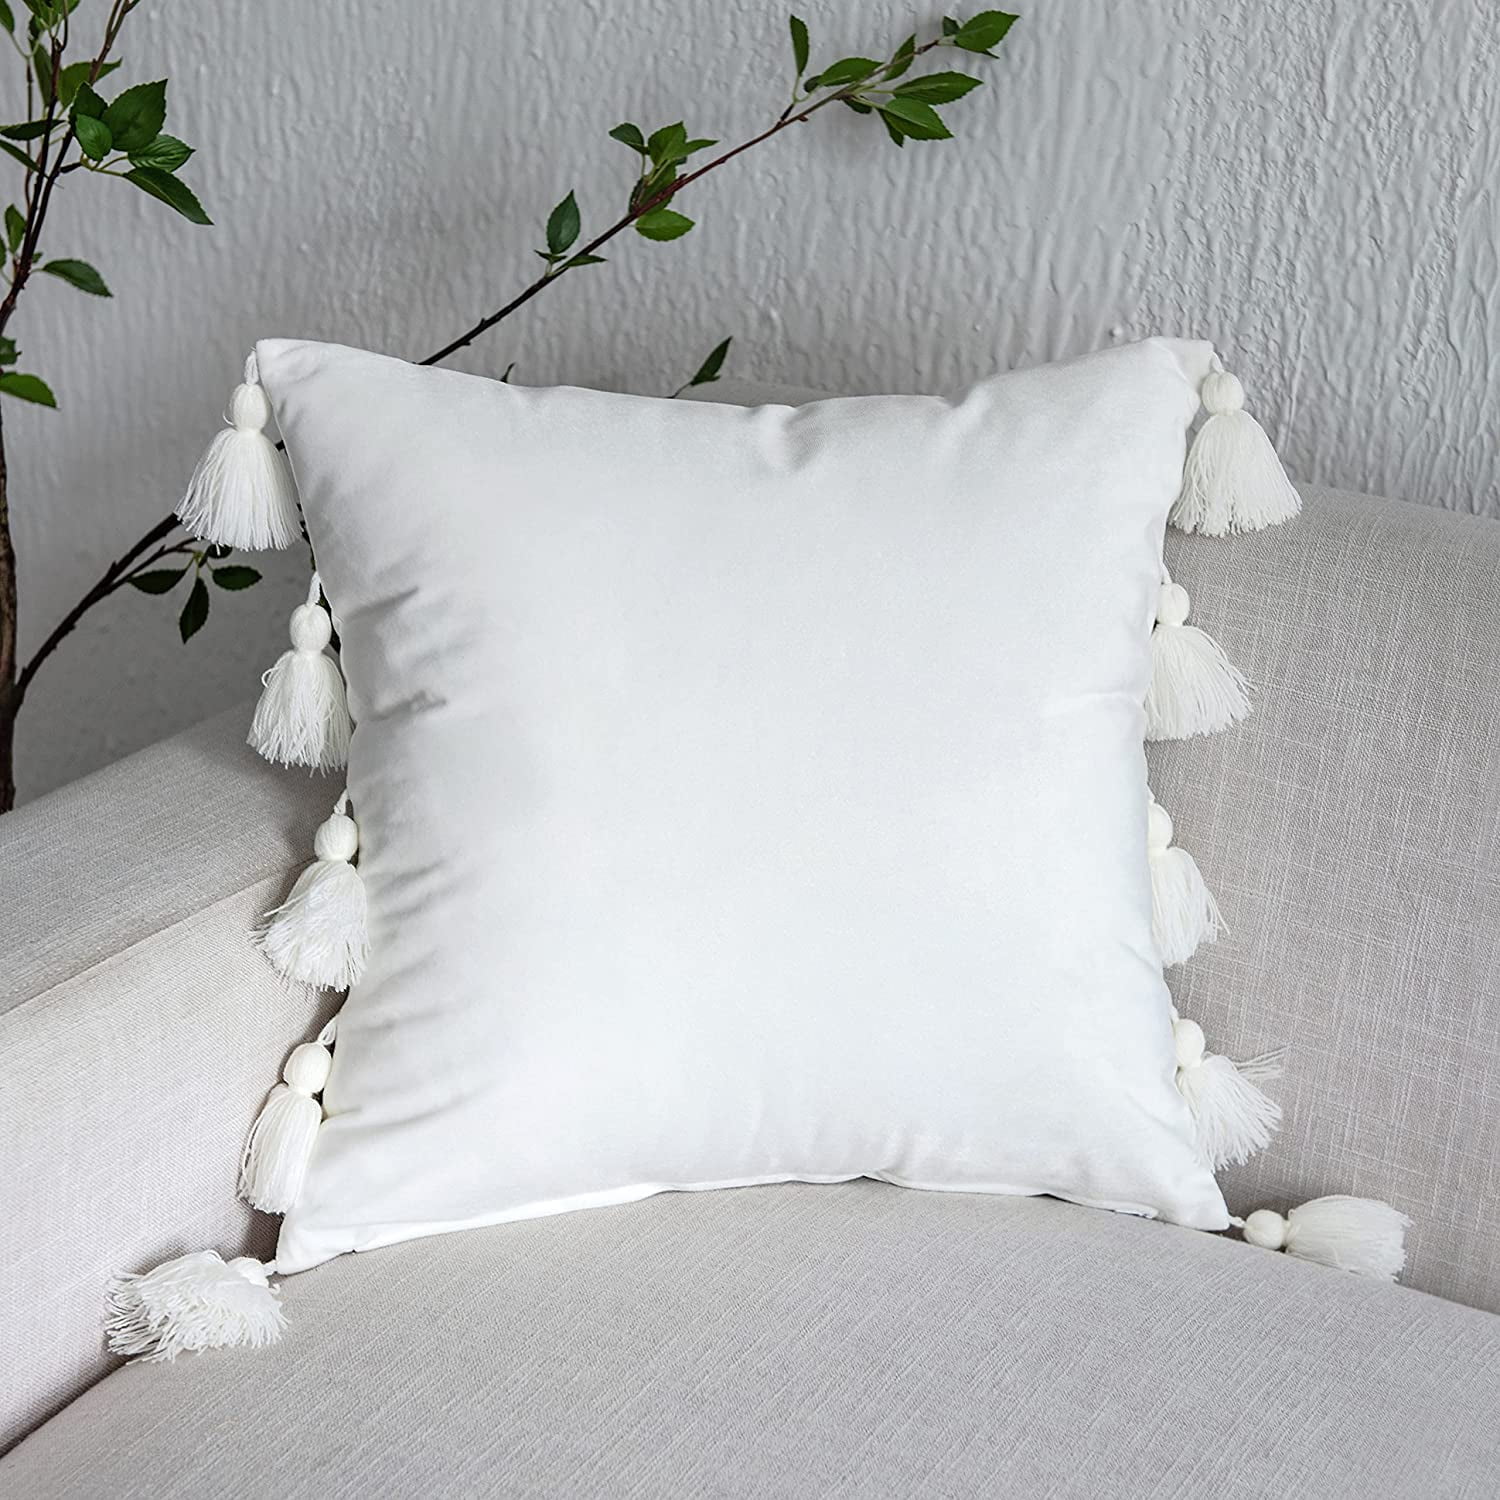 Longhui bedding Ivory White Throw Pillow Covers for Couch Sofa Chair,  Cotton Linen Decorative Pillows Cushion Covers, 18 x 18 inches, Set of 2,  No